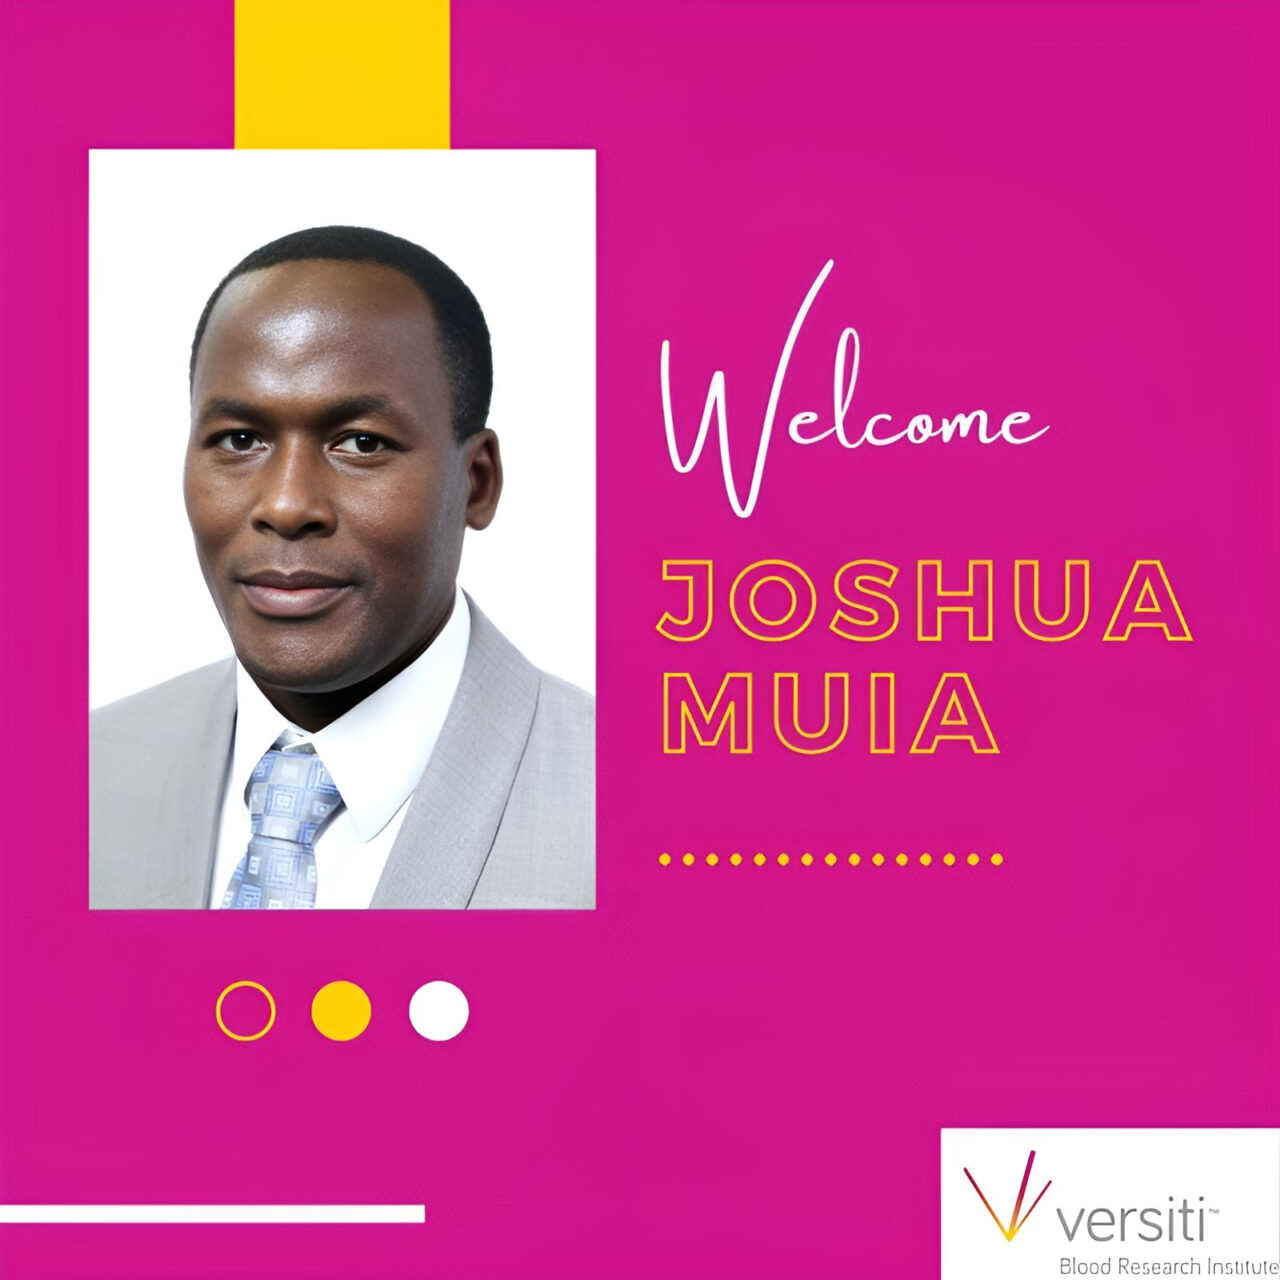 Joshua Muia: Thank you for the warm welcome Versiti Blood Research Institute community